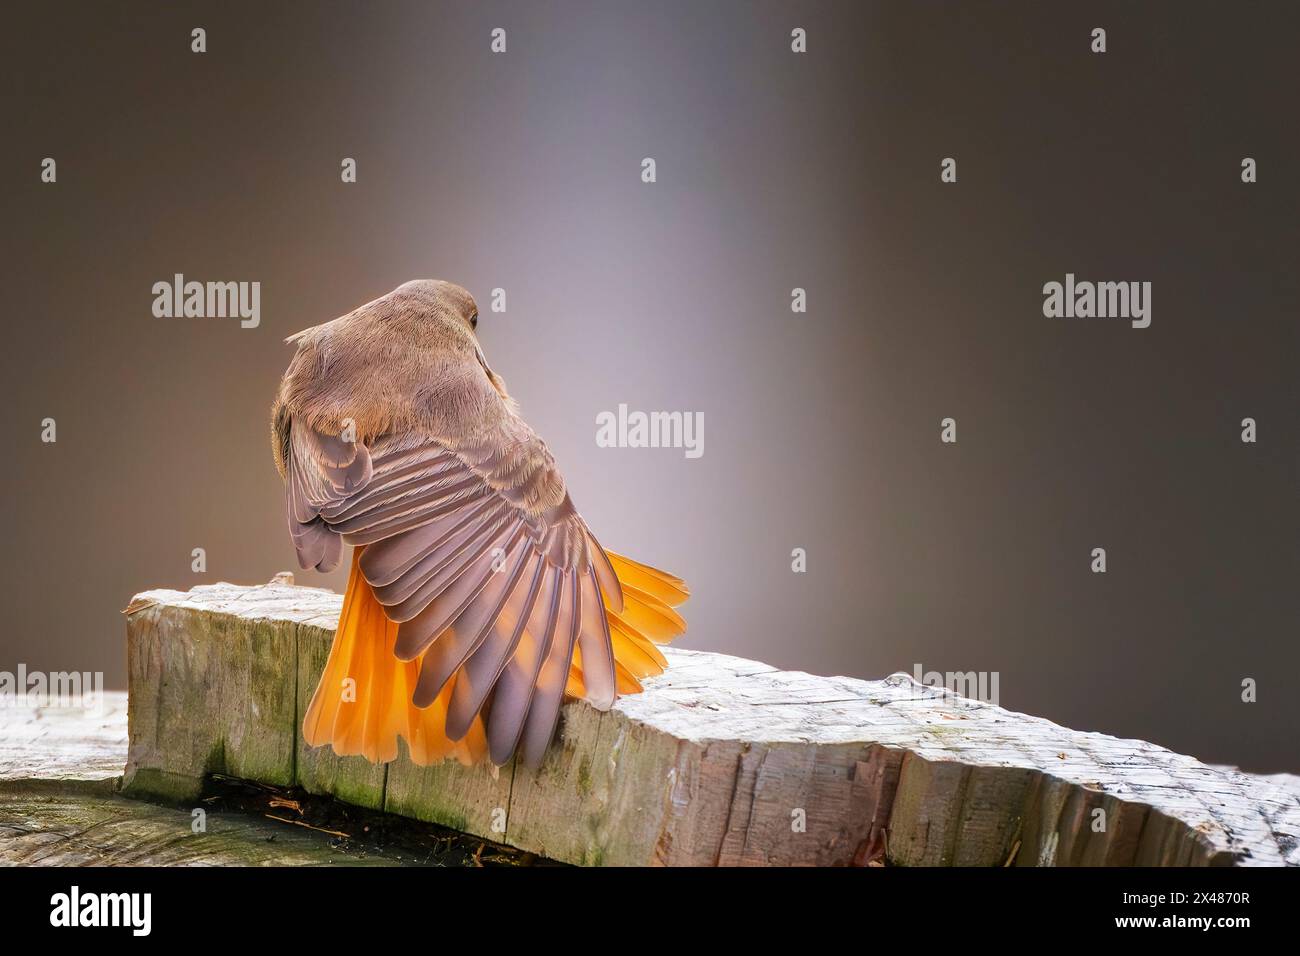 Female common redstart (Phoenicurus phoenicurus) perched on a trunk of a cut tree and stretching a wing. Copy space image. Stock Photo